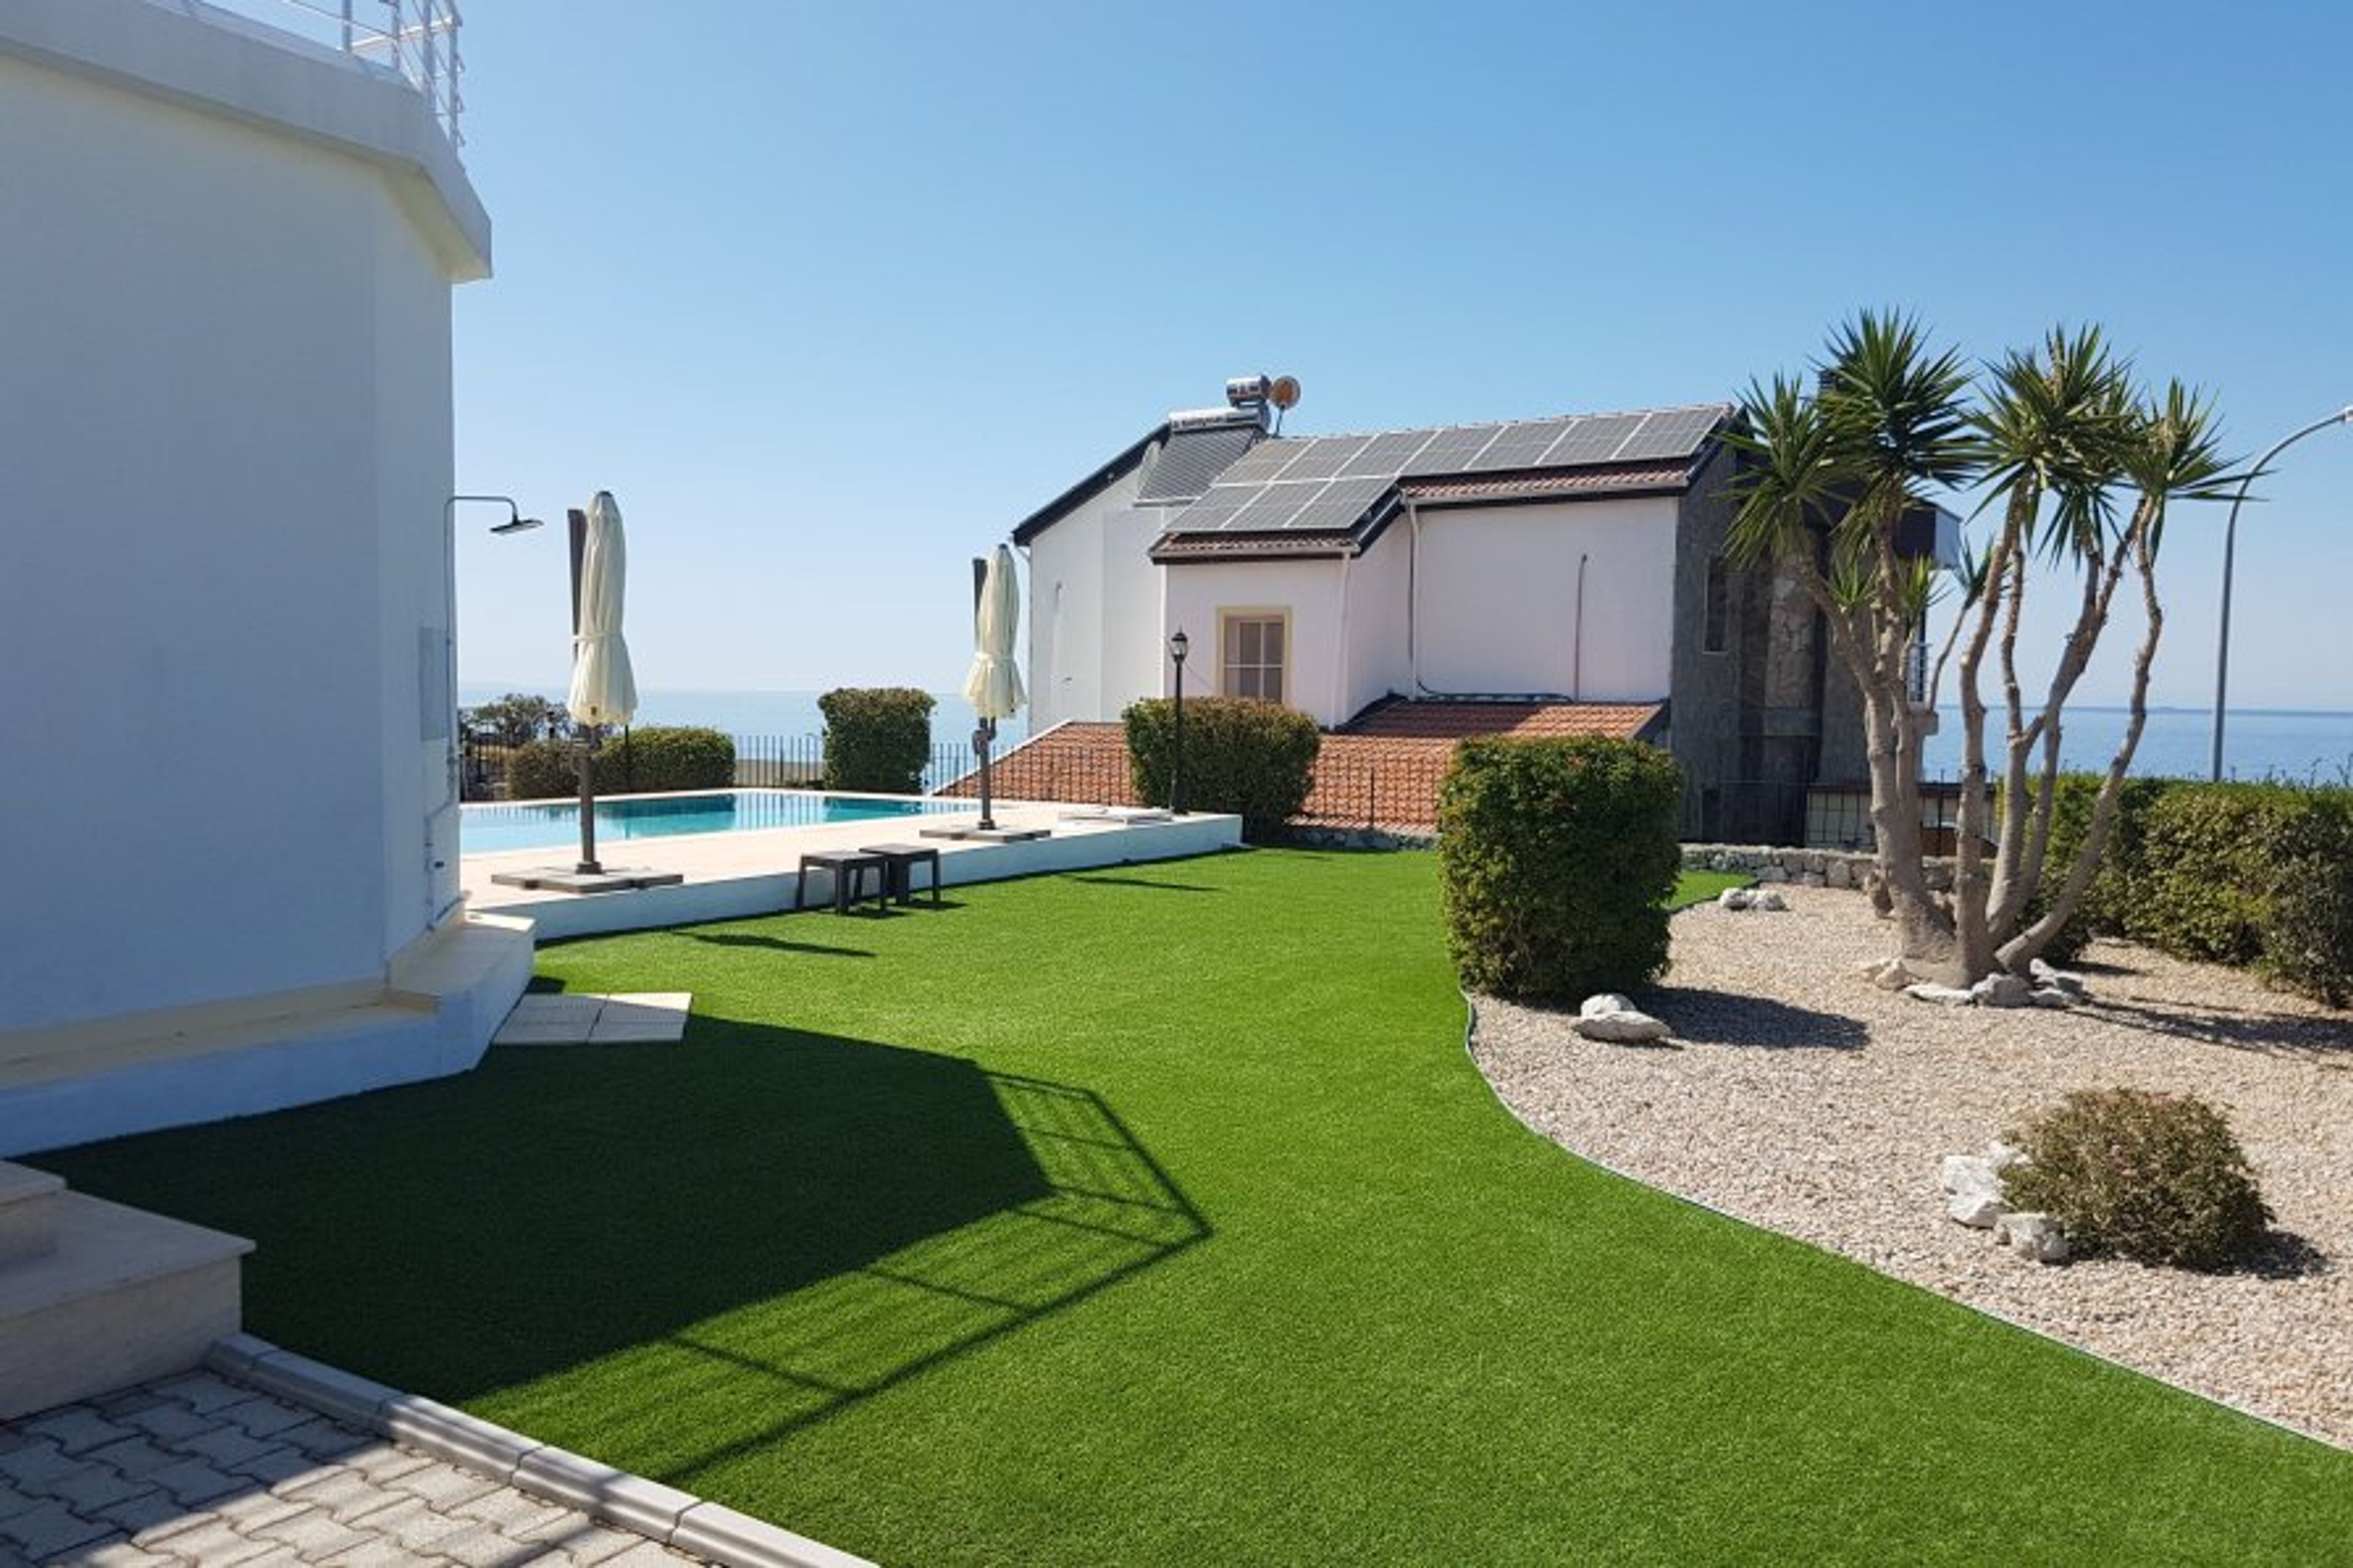 Large expanse of artificial grass